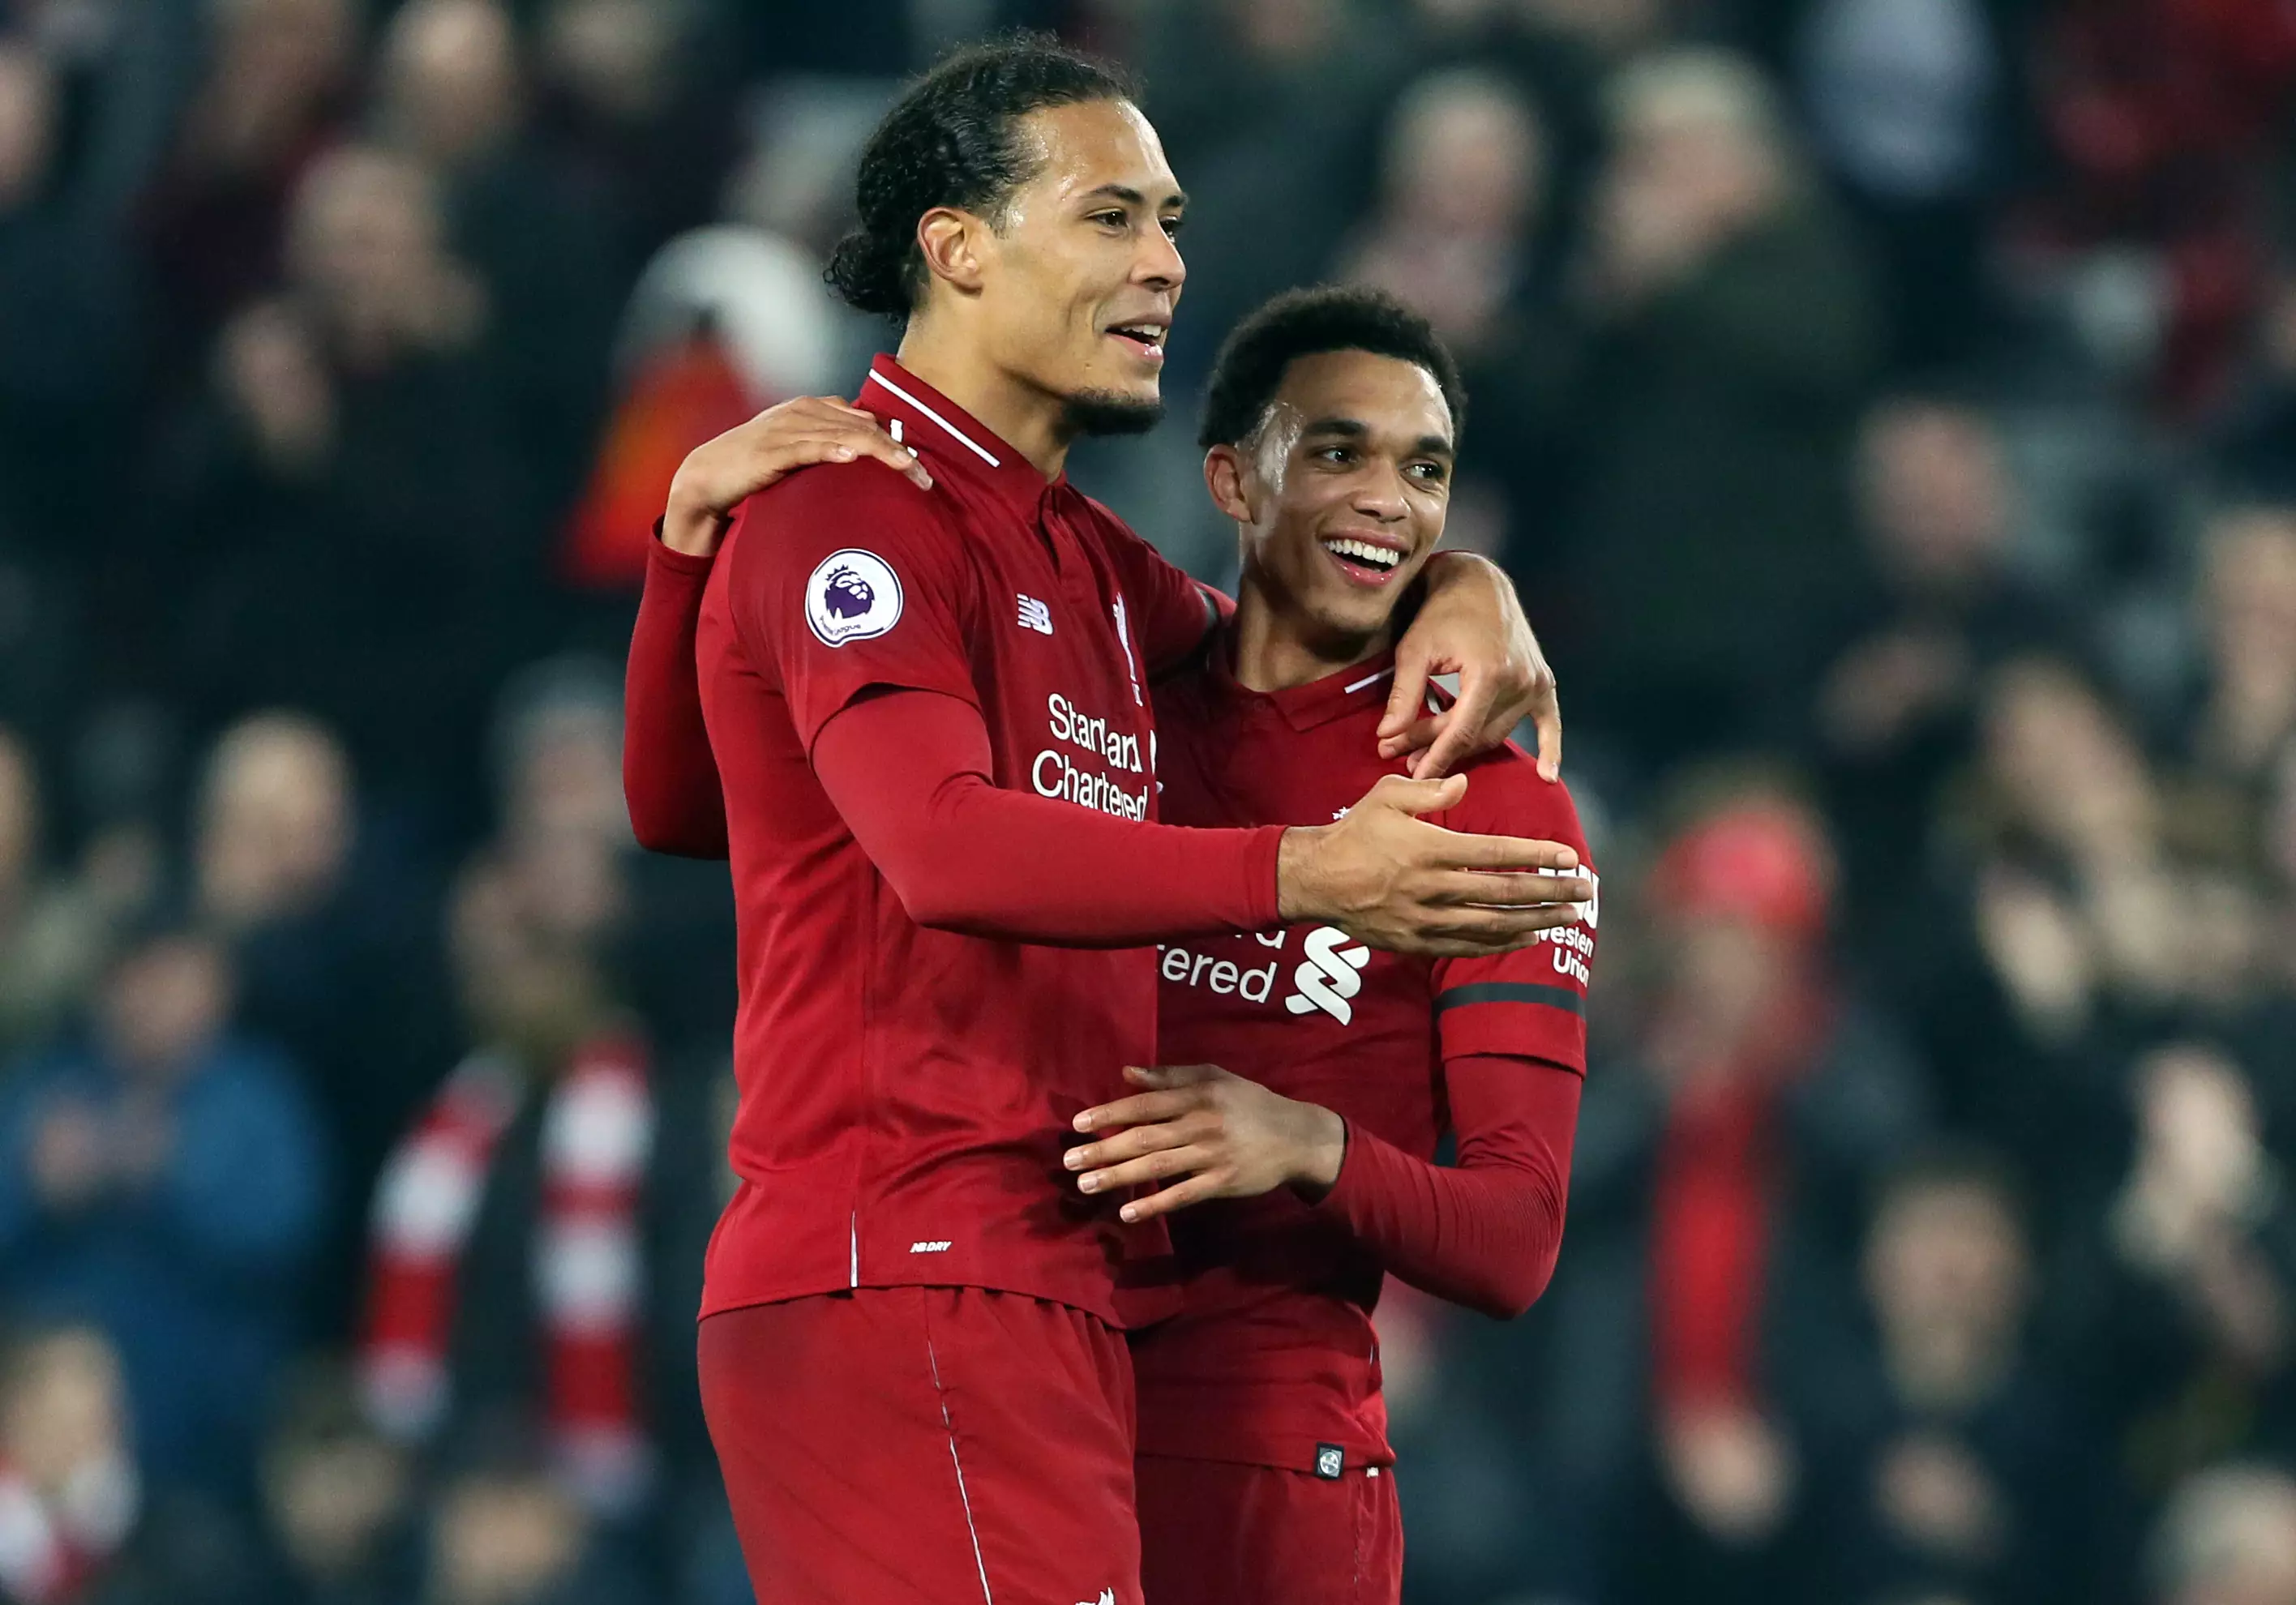 Van Dijk has been exceptional for the past 18 months. Image: PA Images